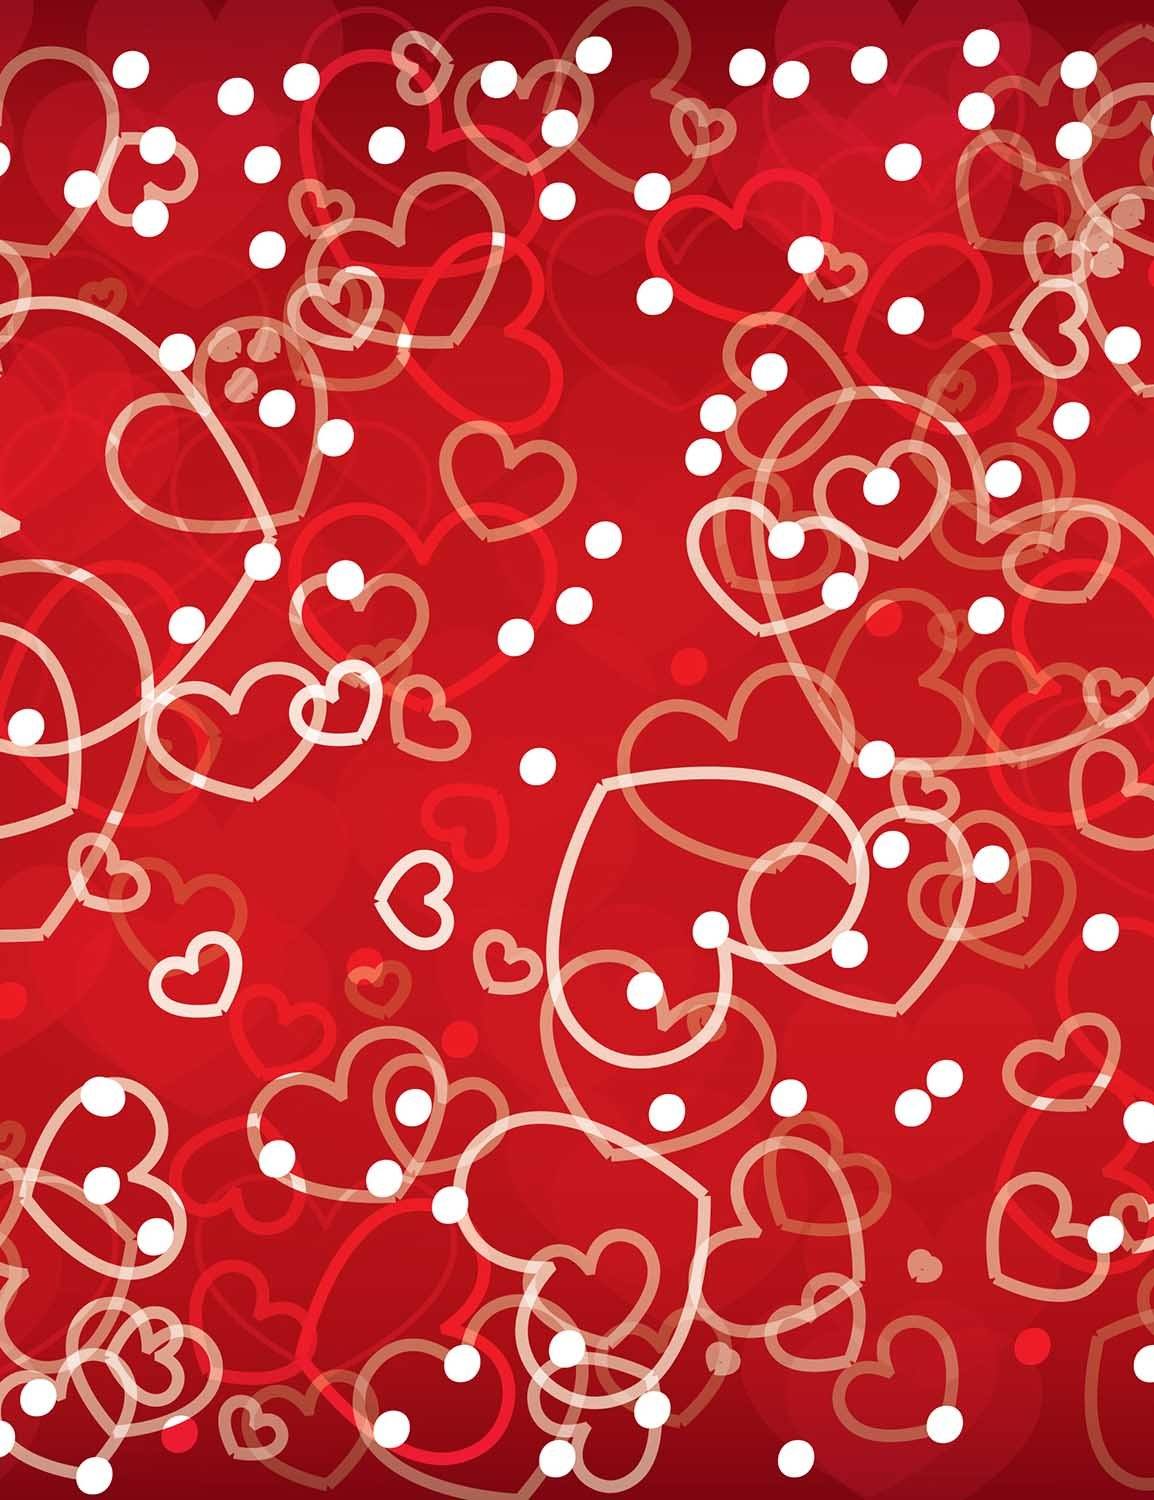 Red Background With Hearts And White Dots Backdrop Shopbackdrop